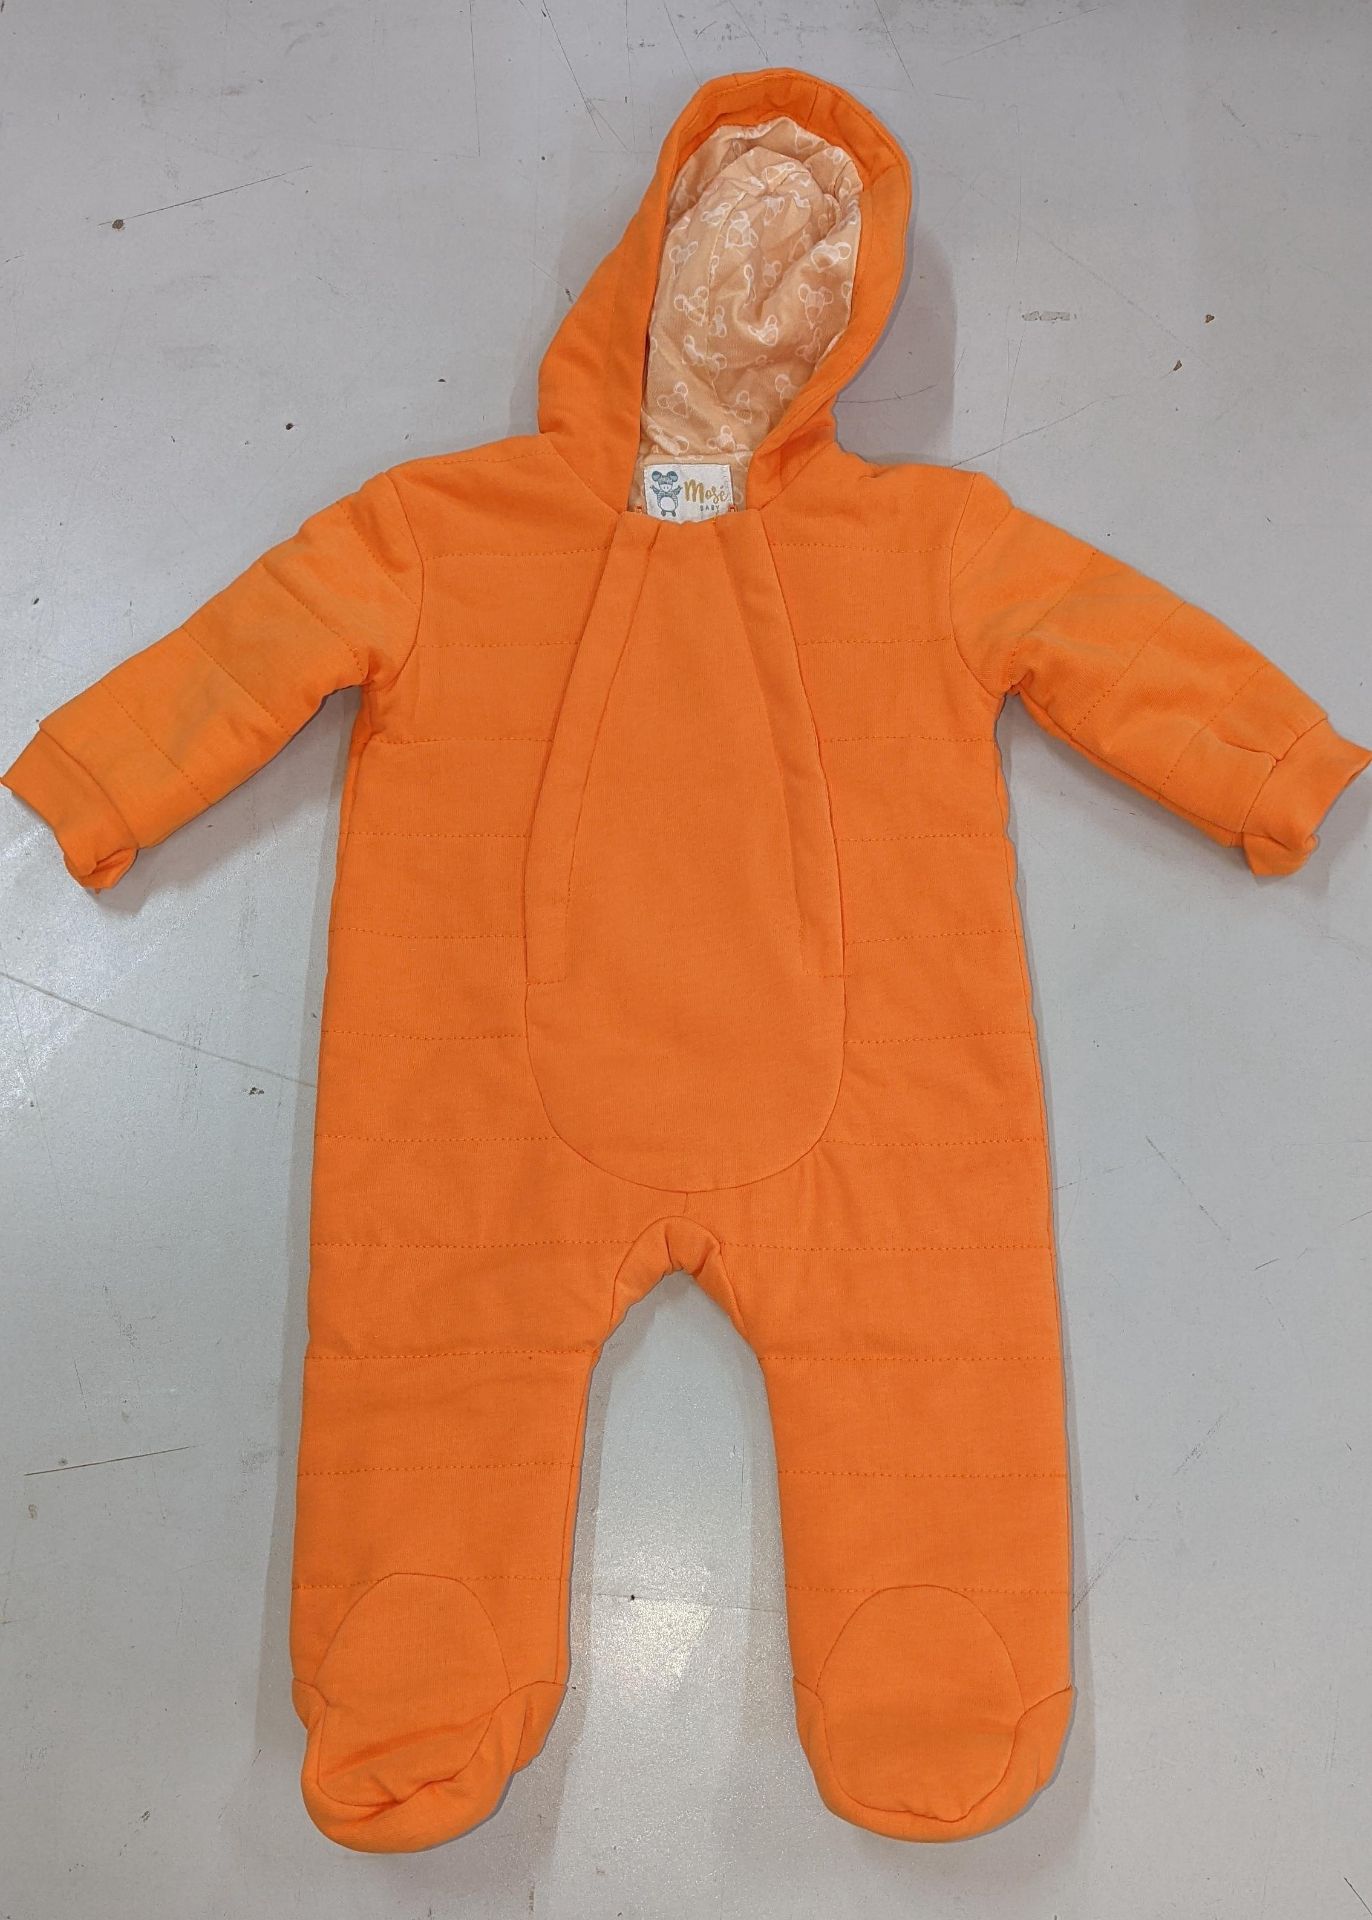 16 off Mosé Baby unisex orange romper body suits, in 100% cotton with Mosé Baby print lining. Age 0 - Image 9 of 10